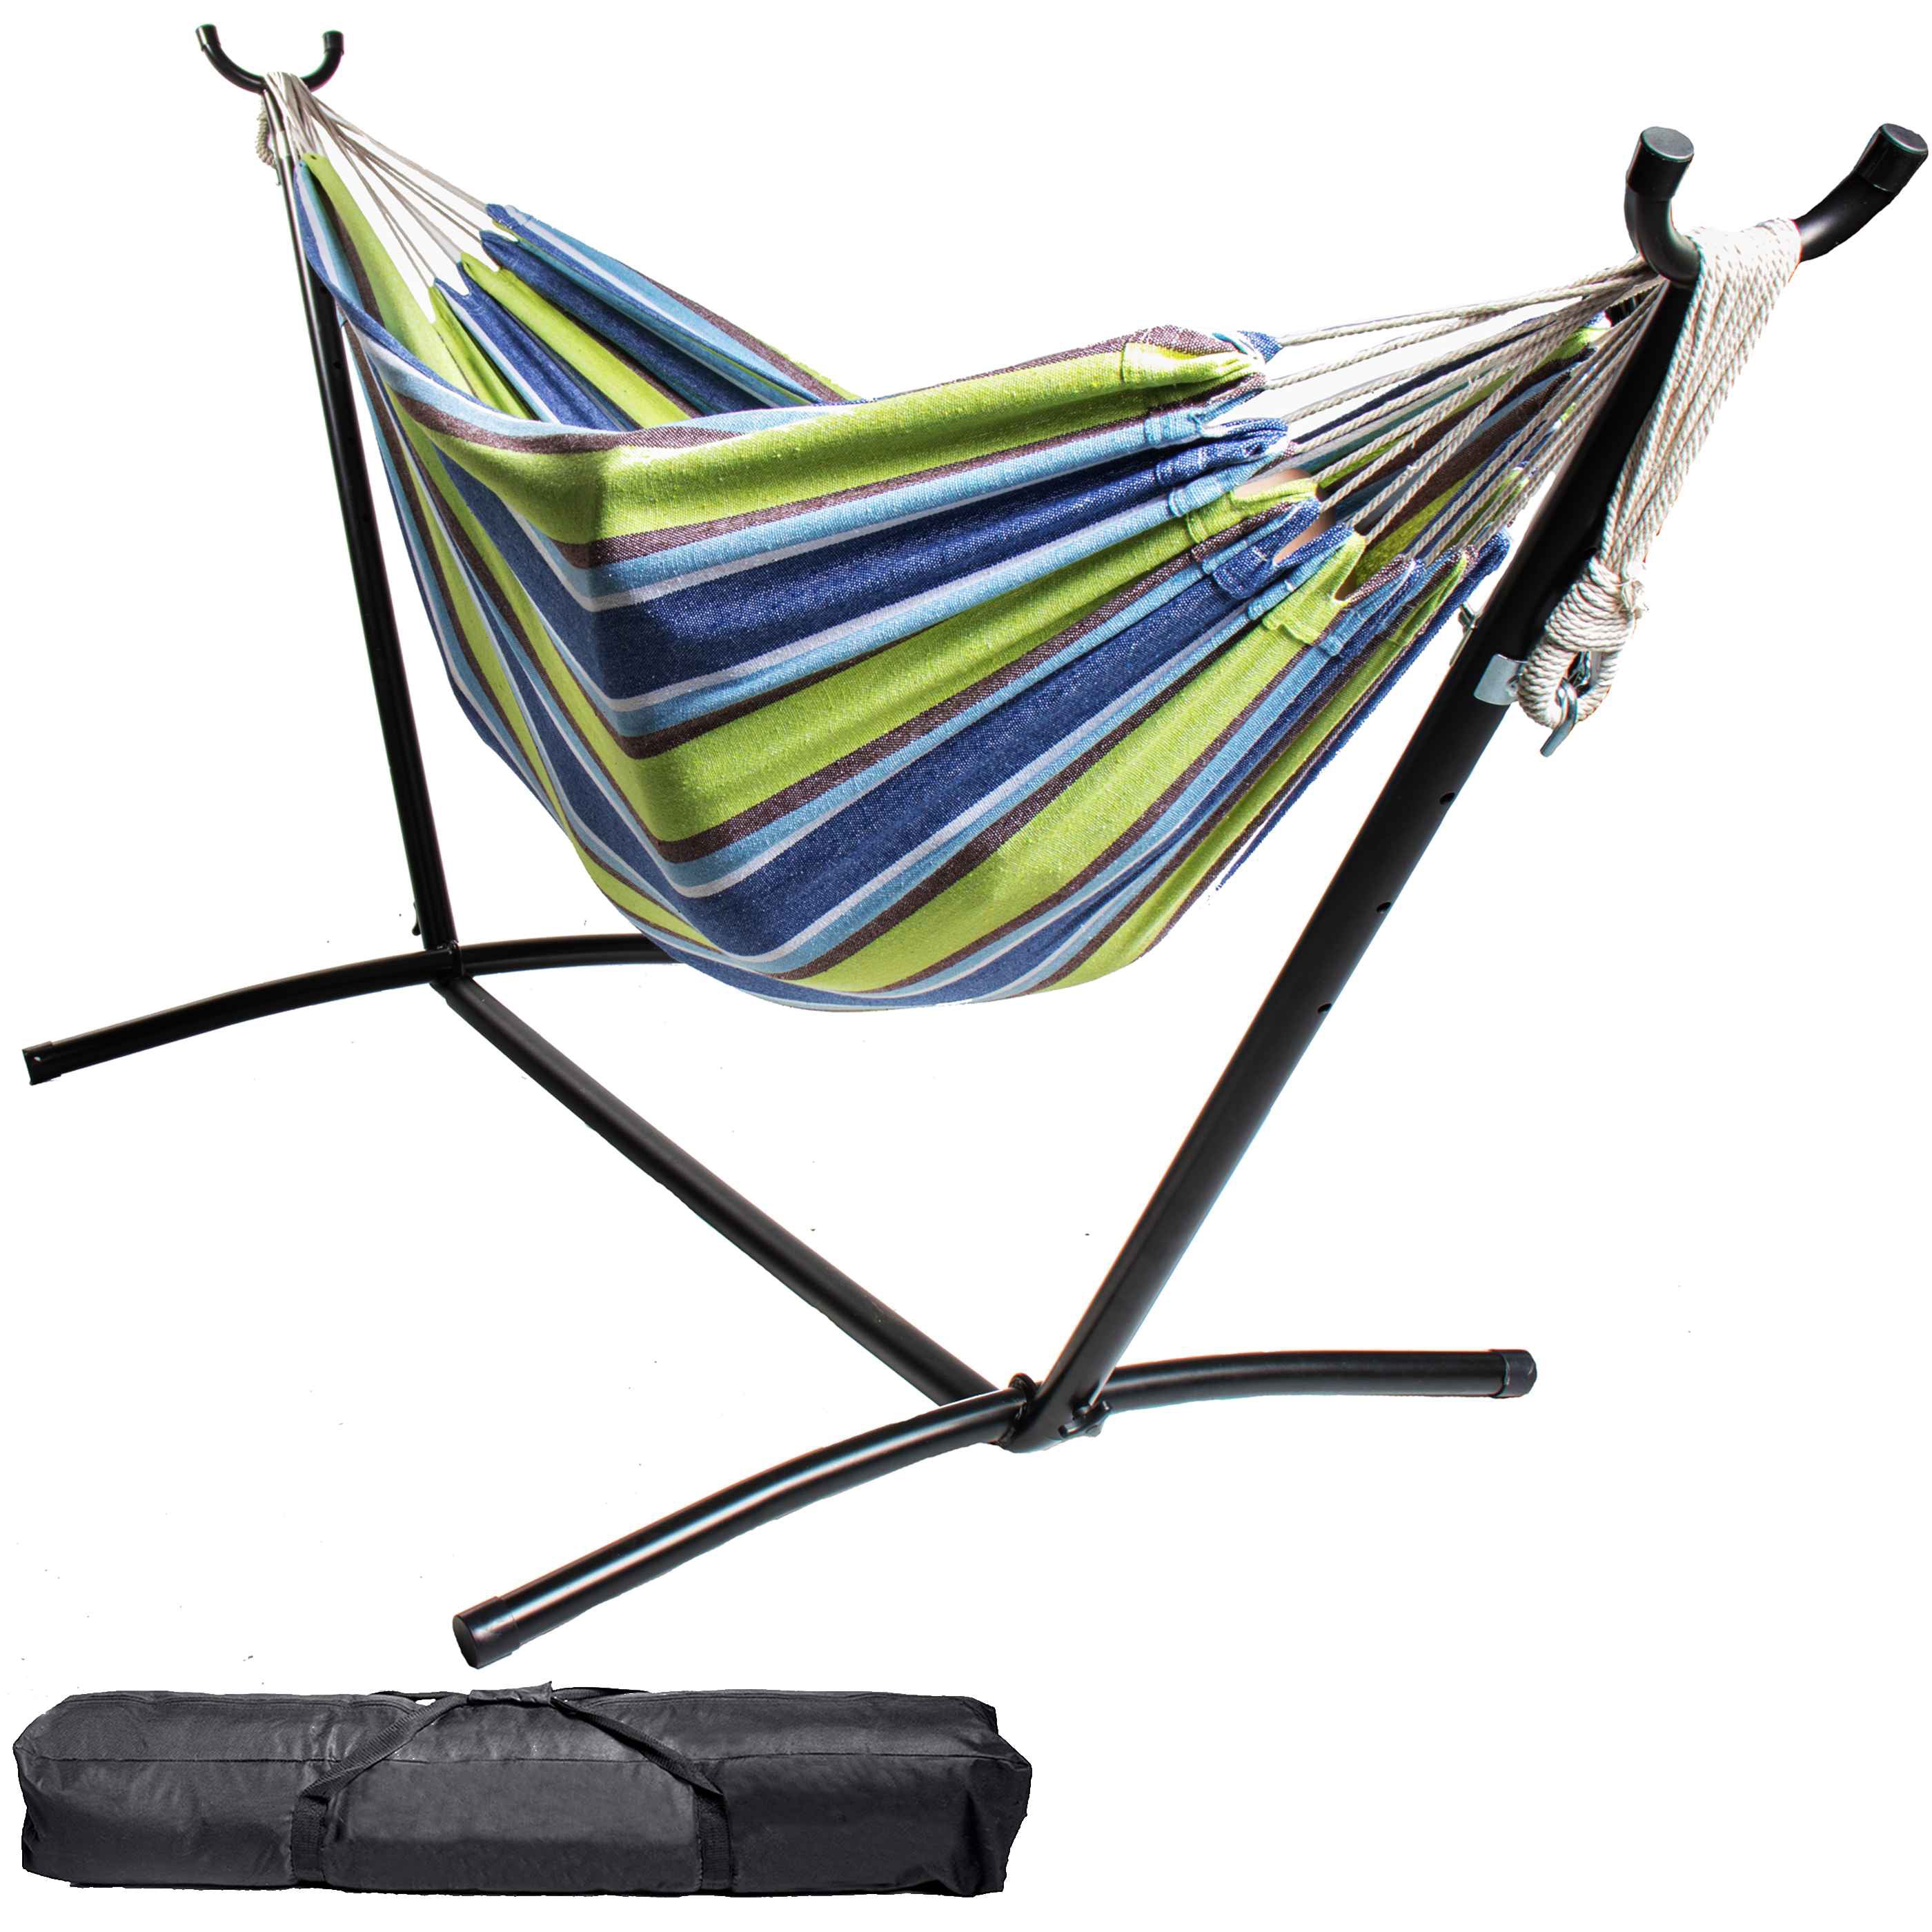 Replacement Parts for Hammock and Frame Combo 914920, 914921, 914922